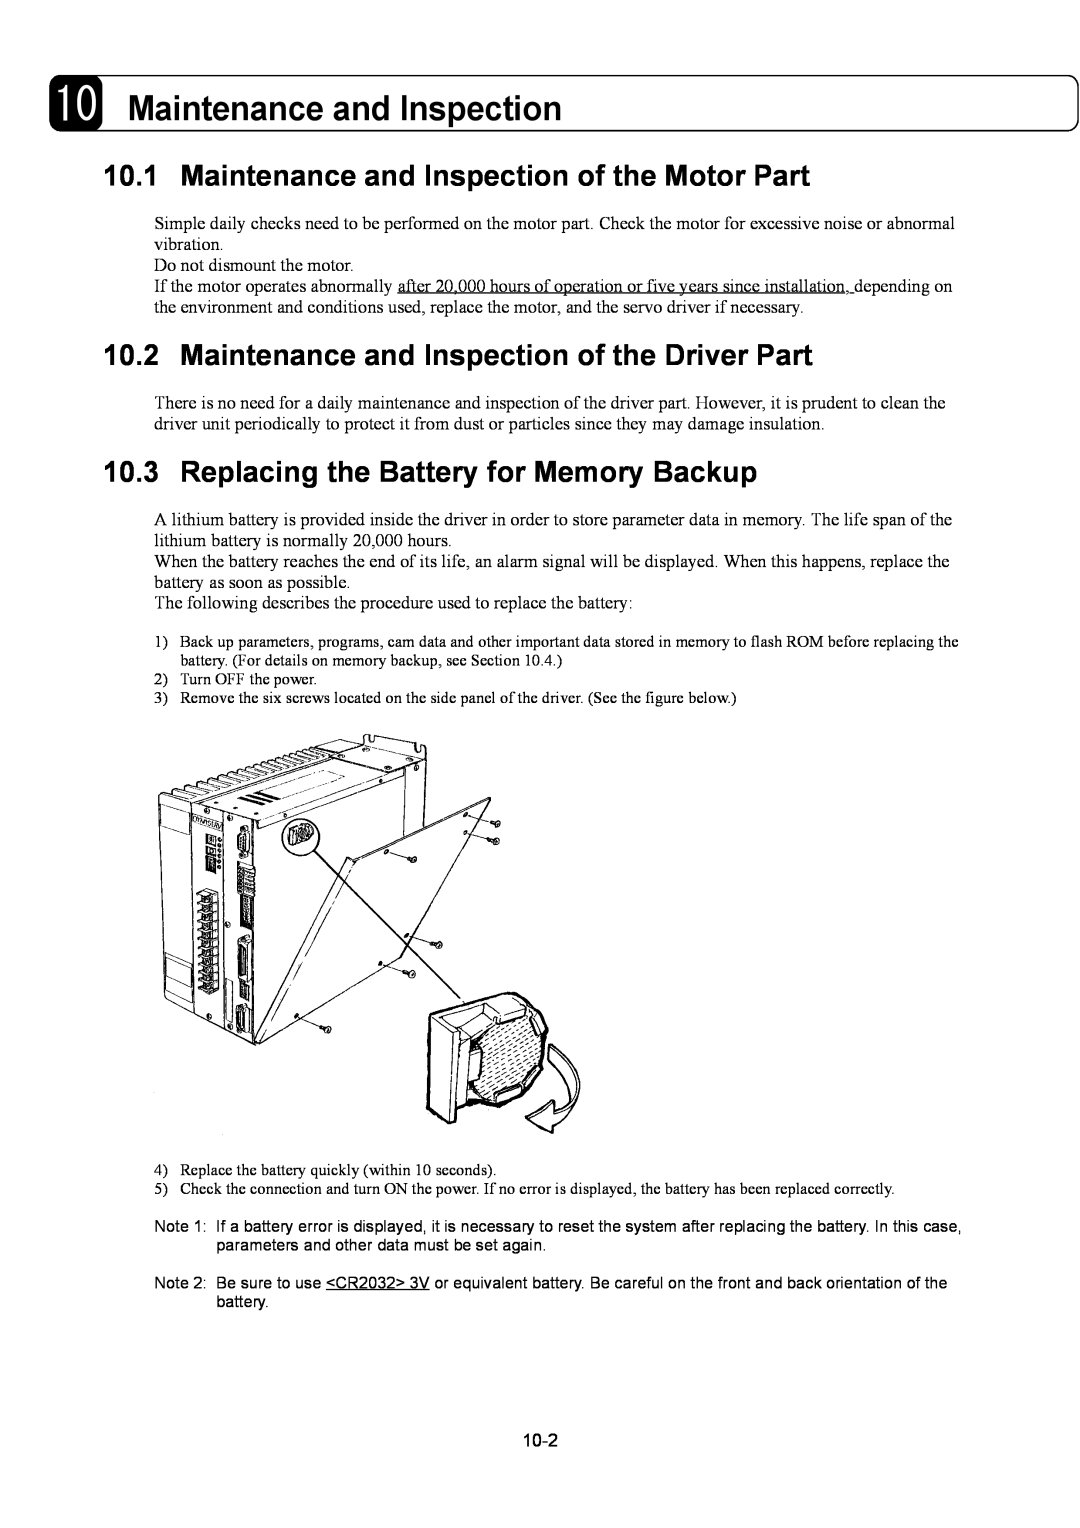 Parker Hannifin G2 manual Maintenance and Inspection of the Motor Part, Maintenance and Inspection of the Driver Part 